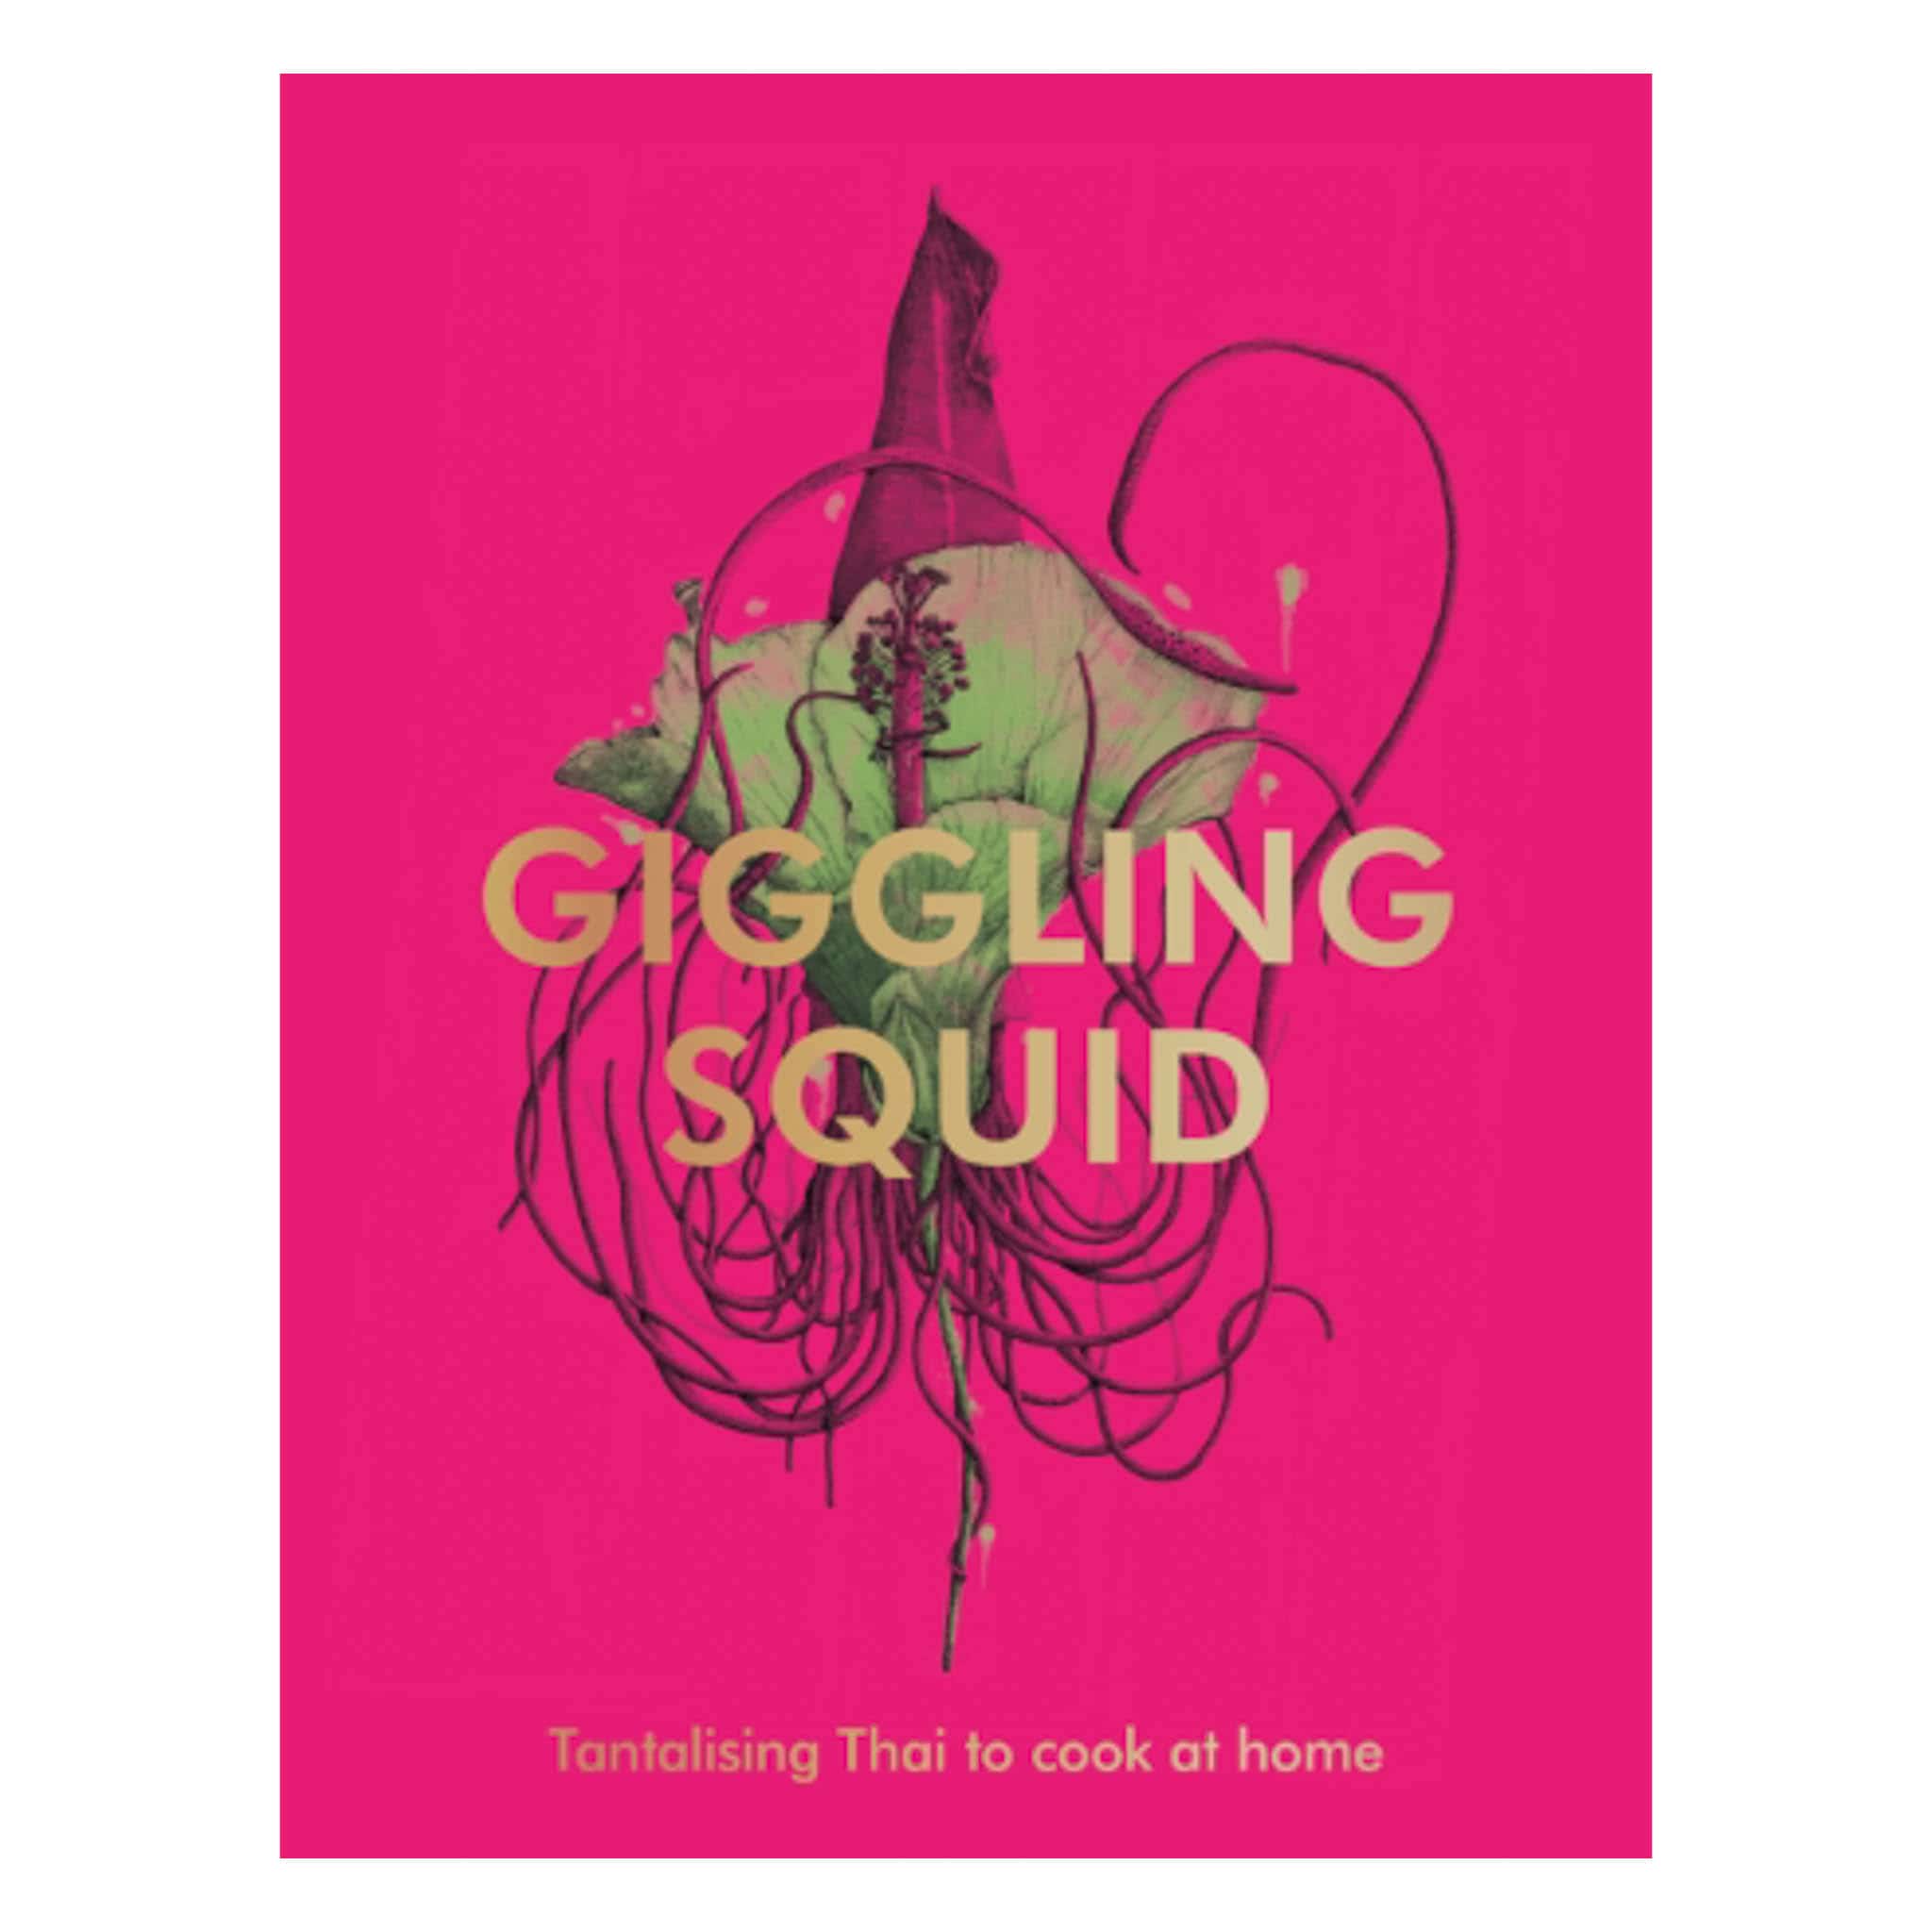 The Giggling Squid Cookbook, by Giggling Squid